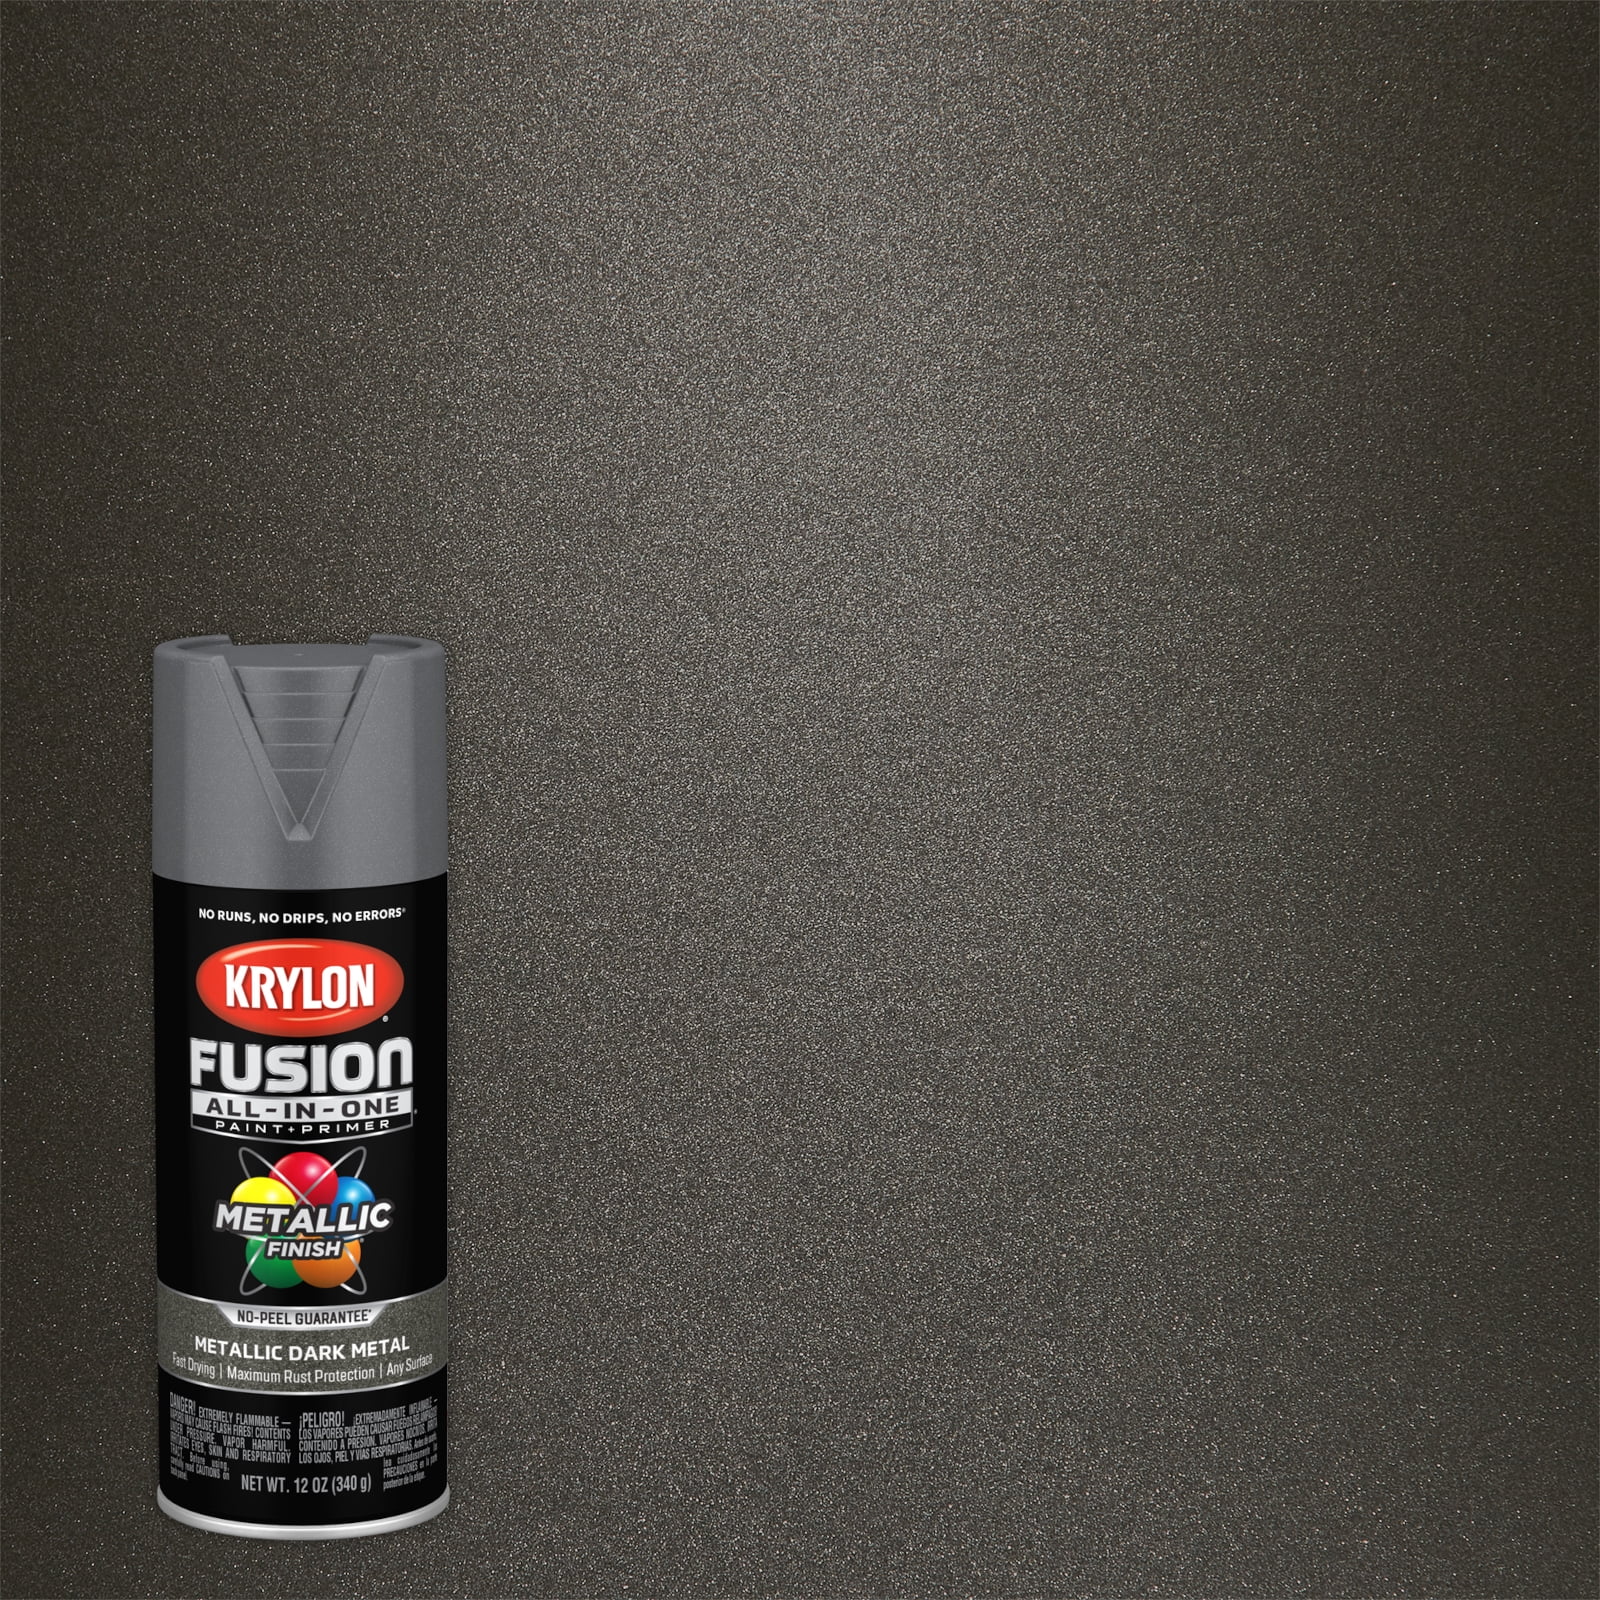 Krylon K02700007 Fusion All-In-One Spray Paint for Indoor/Outdoor Use,  Metallic Rose Gold 12 Ounce (Pack of 1) 